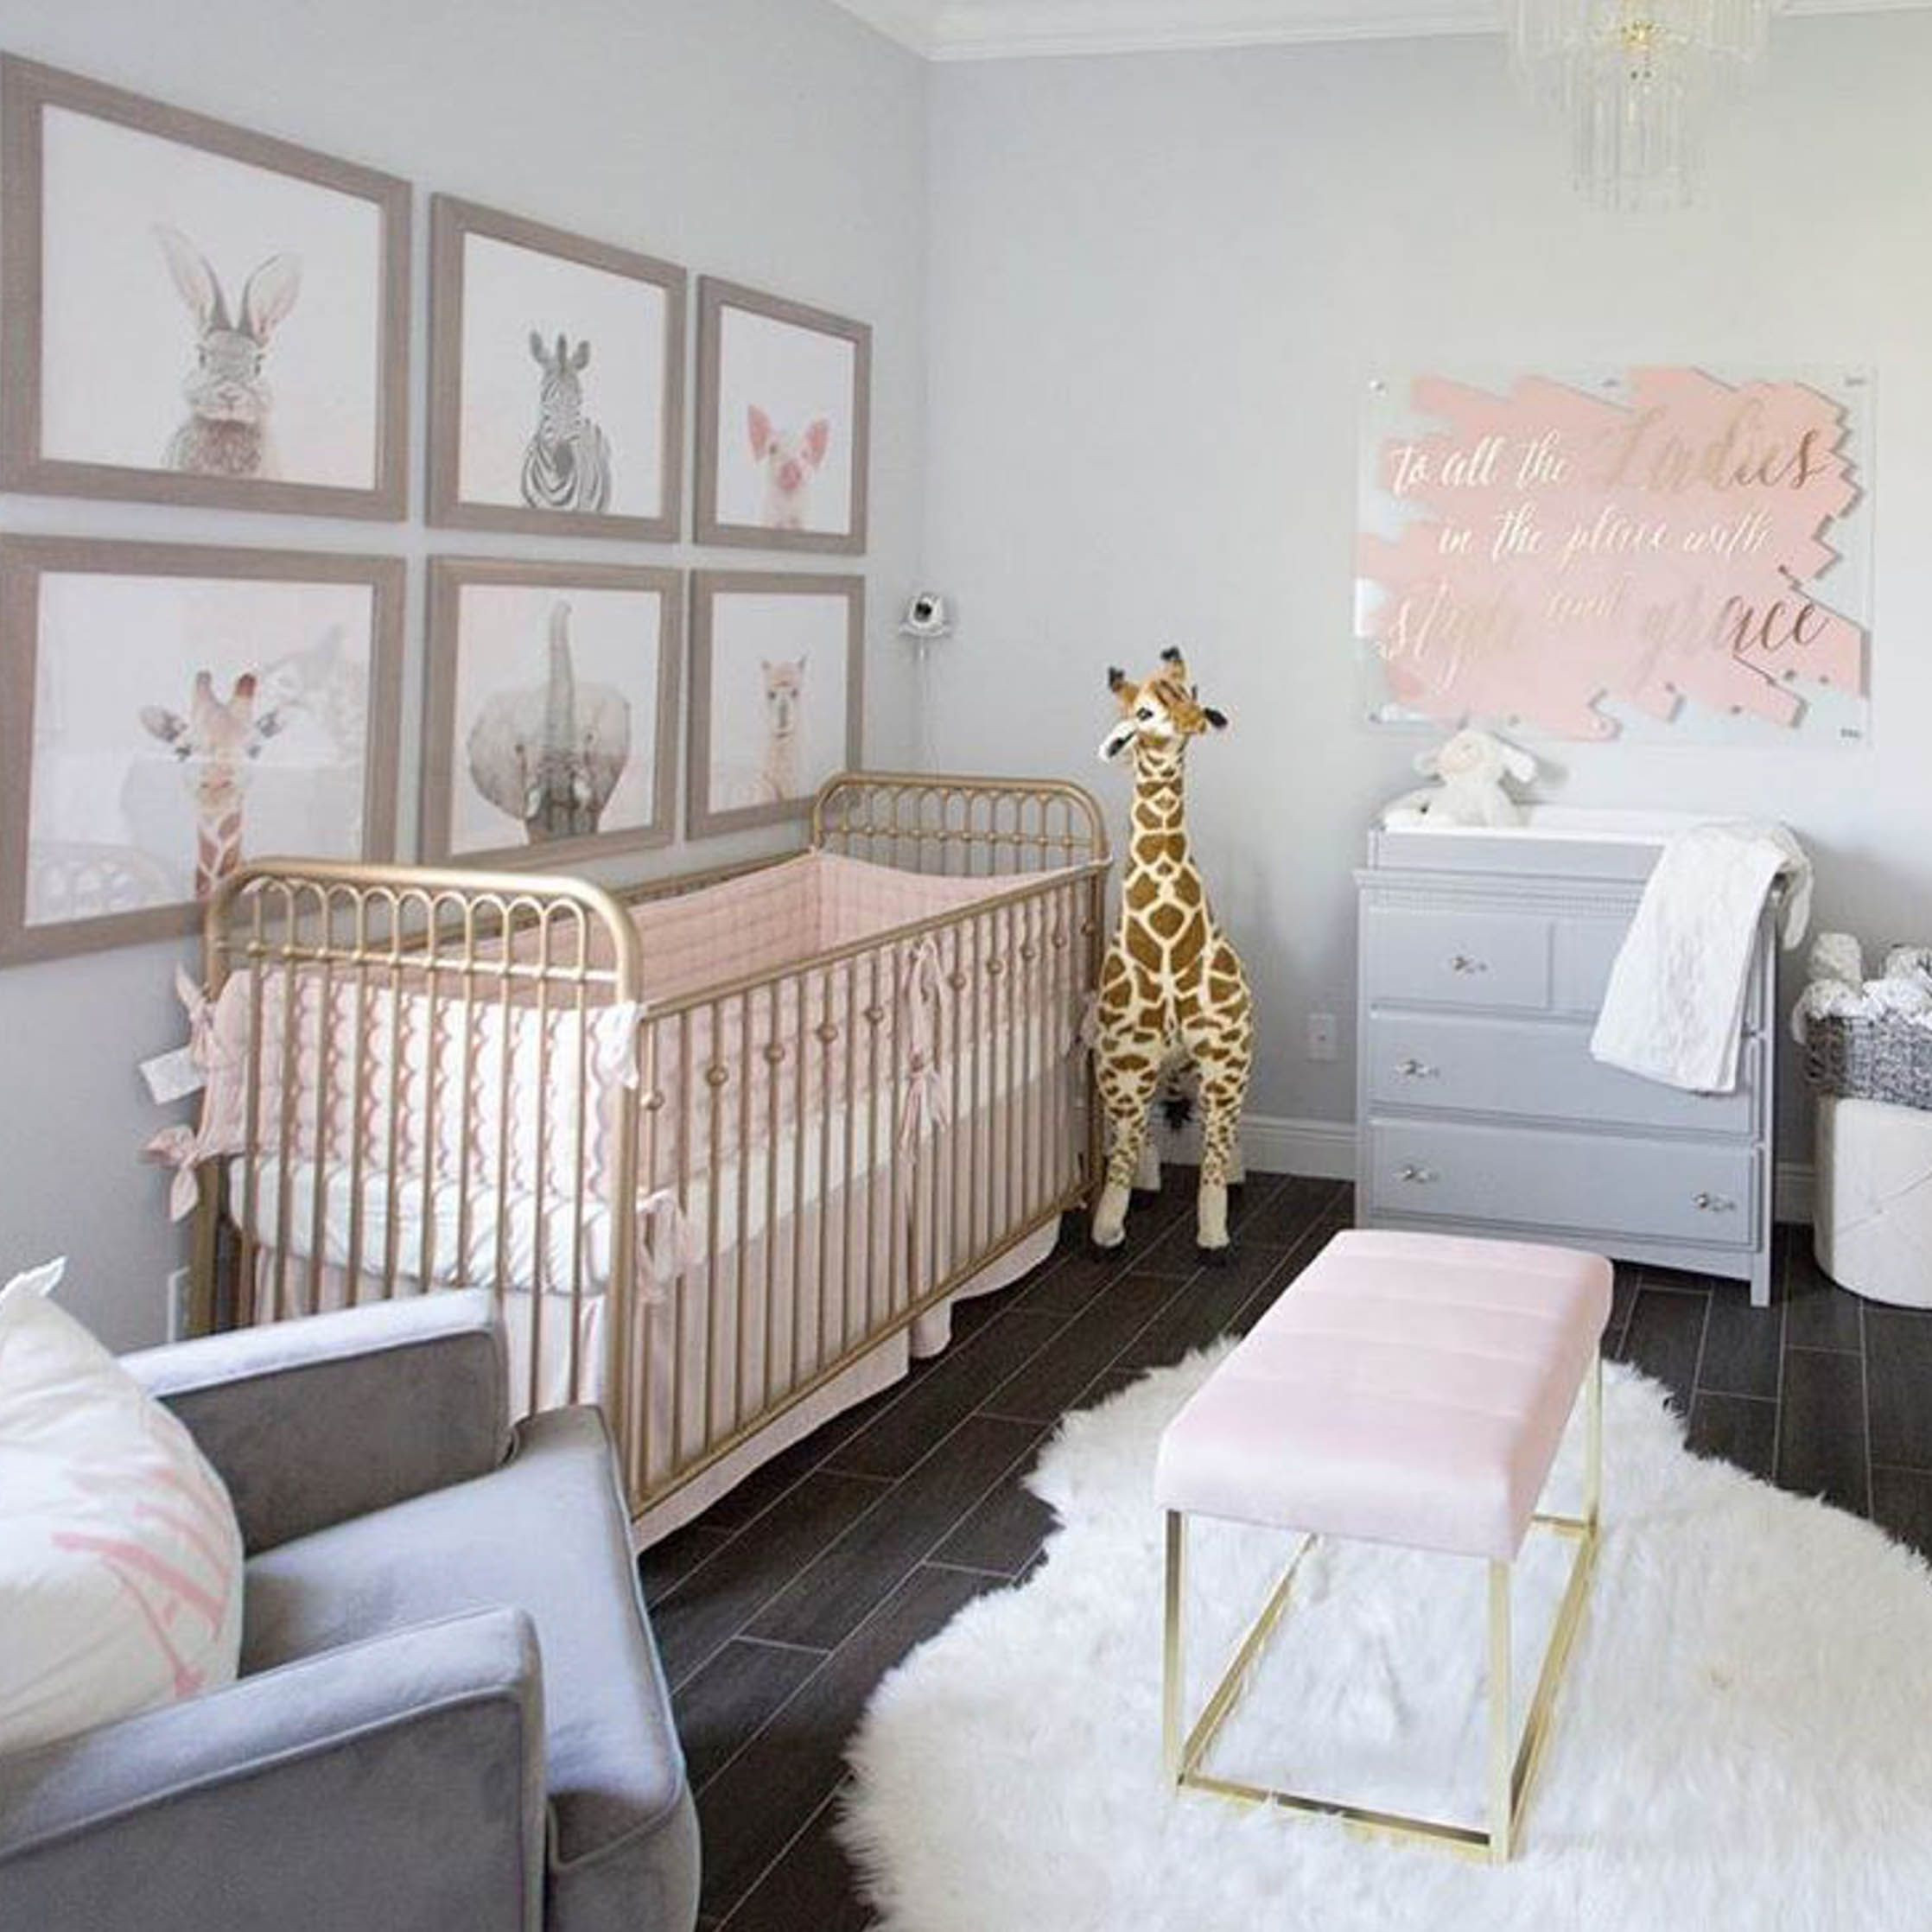 Baby Decor For Nursery
 Here s What s Trending in the Nursery